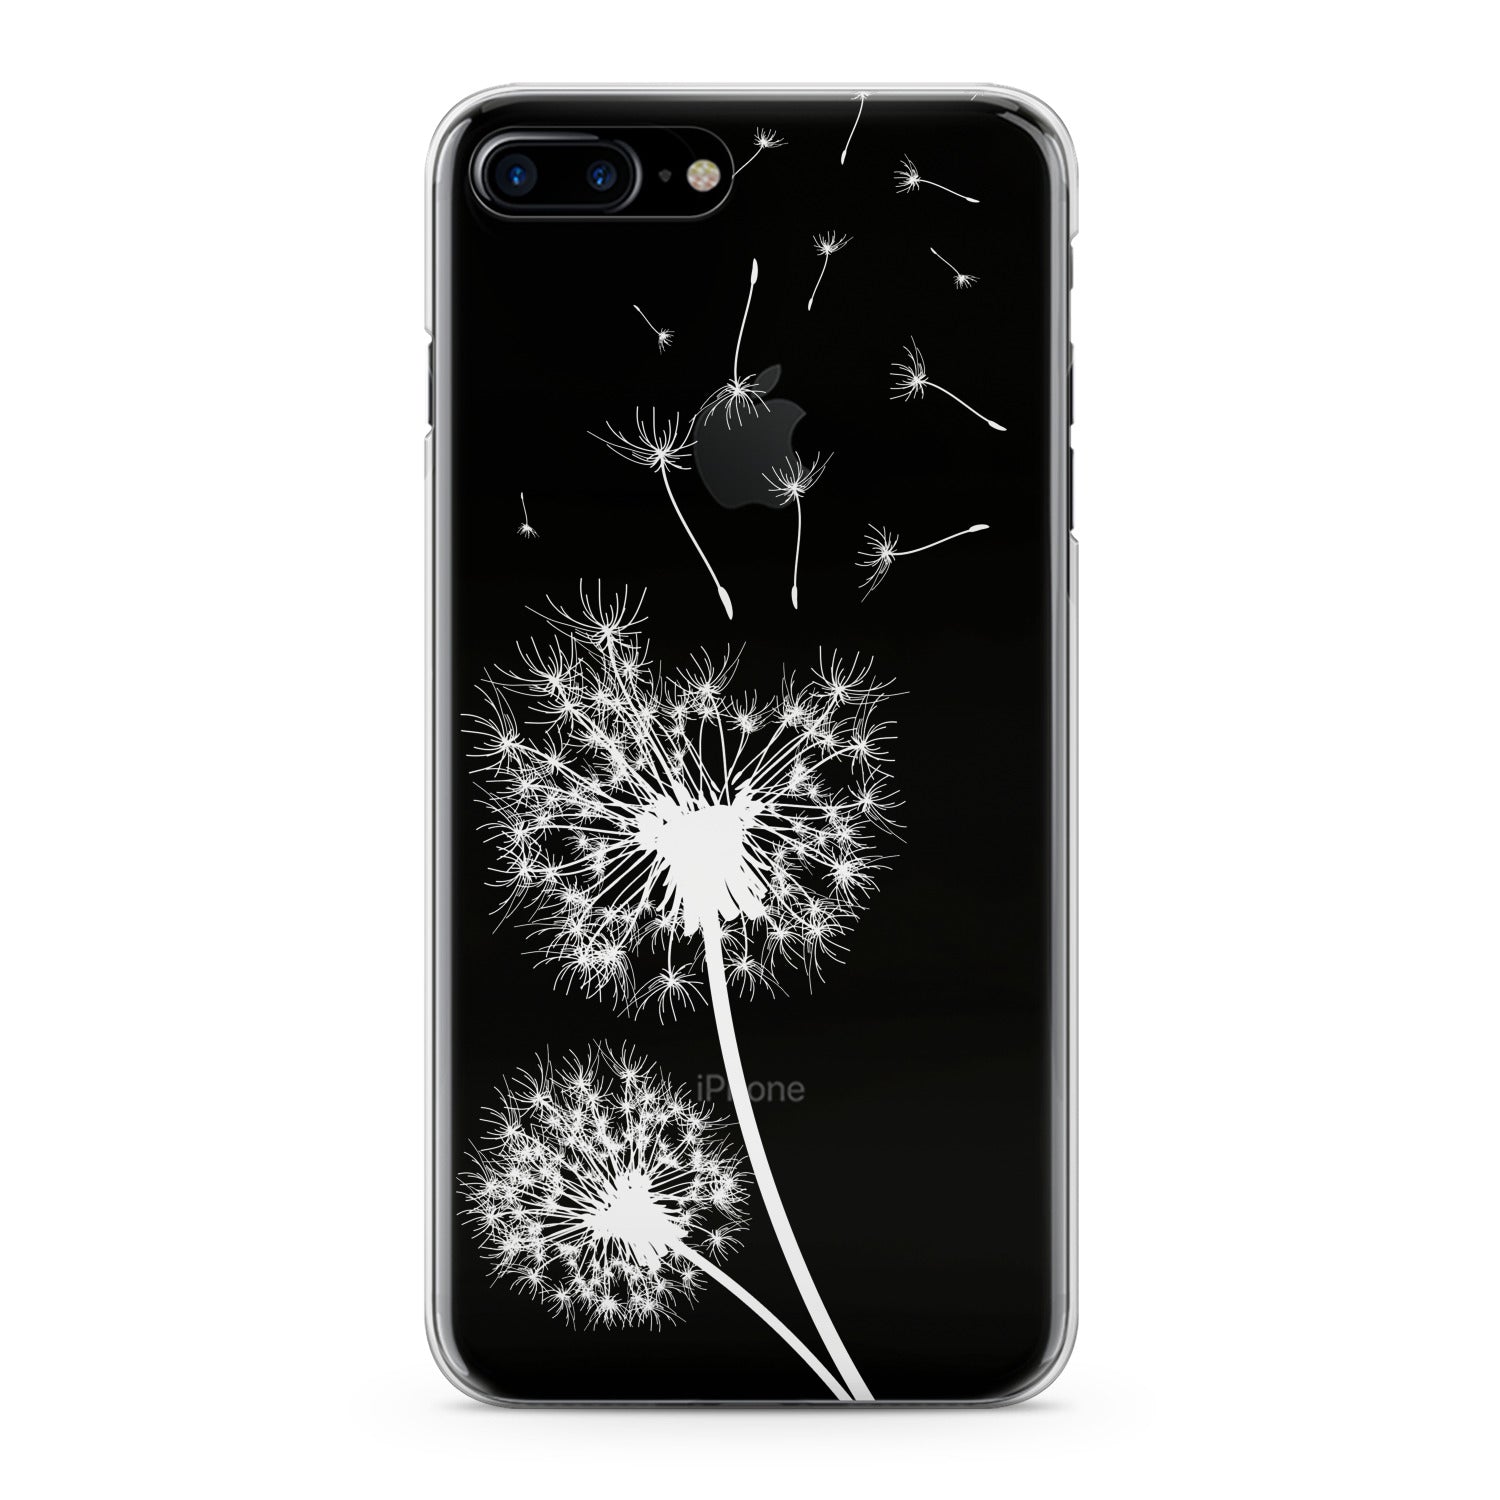 Lex Altern White Dandelion Phone Case for your iPhone & Android phone.